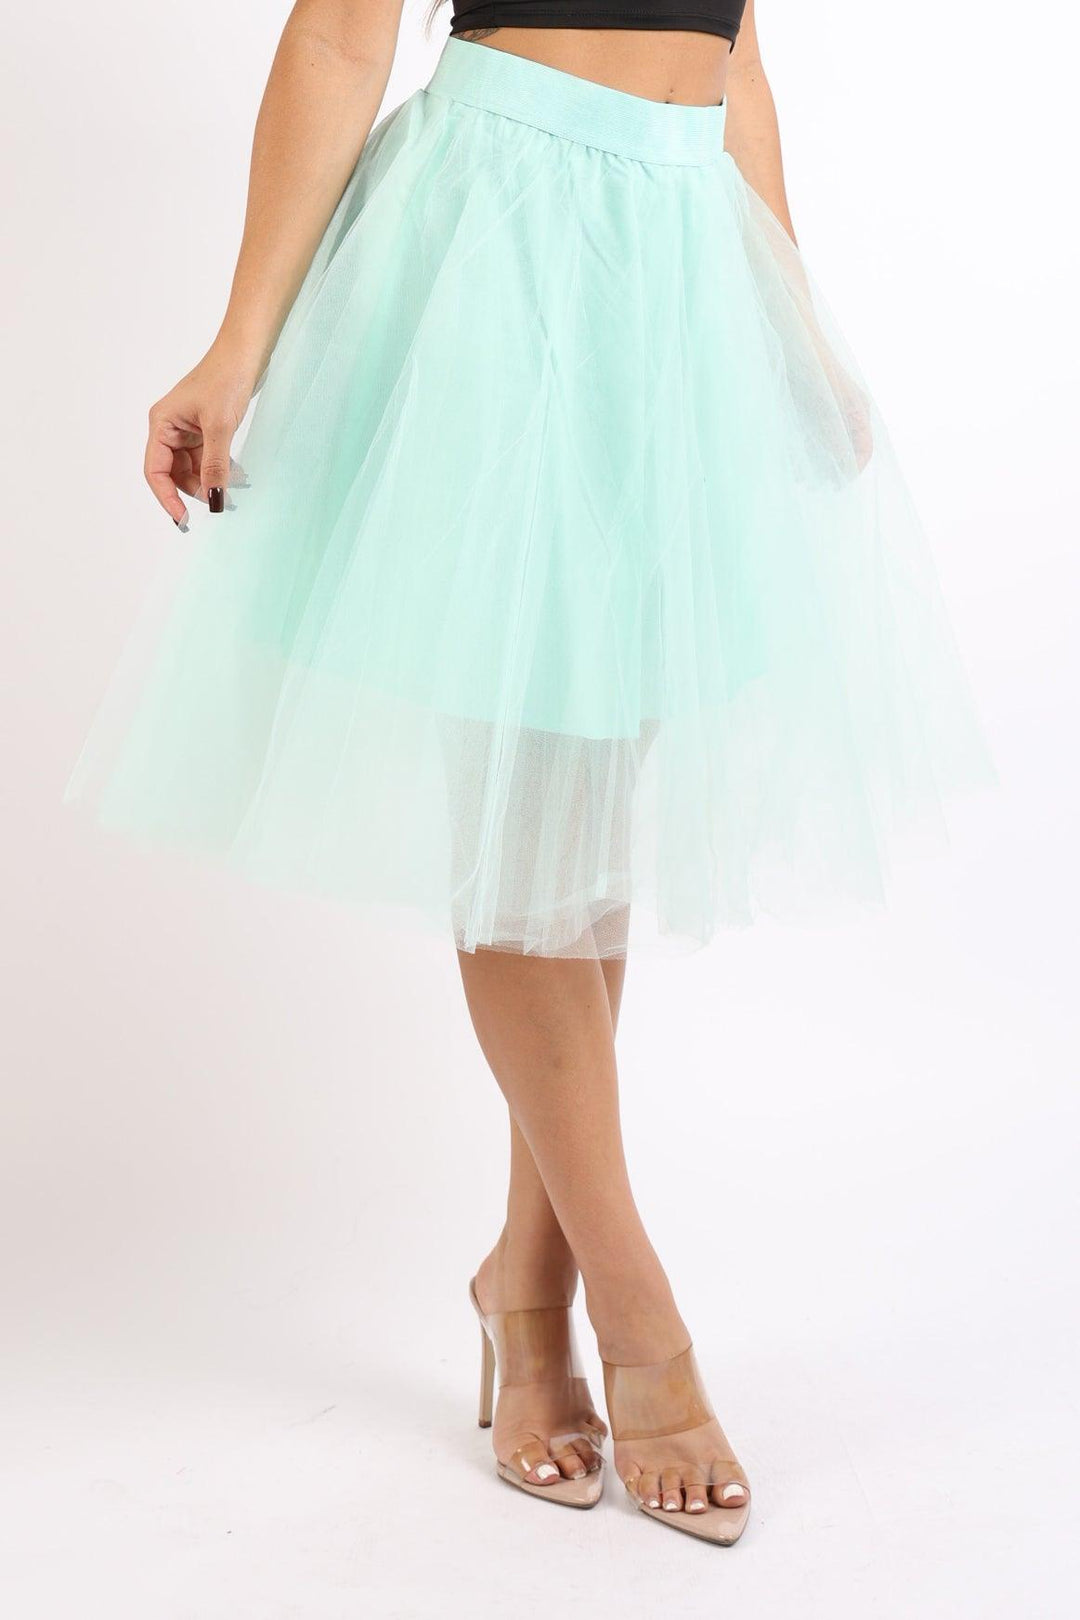 Tutu Tulle Knee Length A Line Ballet Dance Prom Party Layers Skirt - Brand My Case